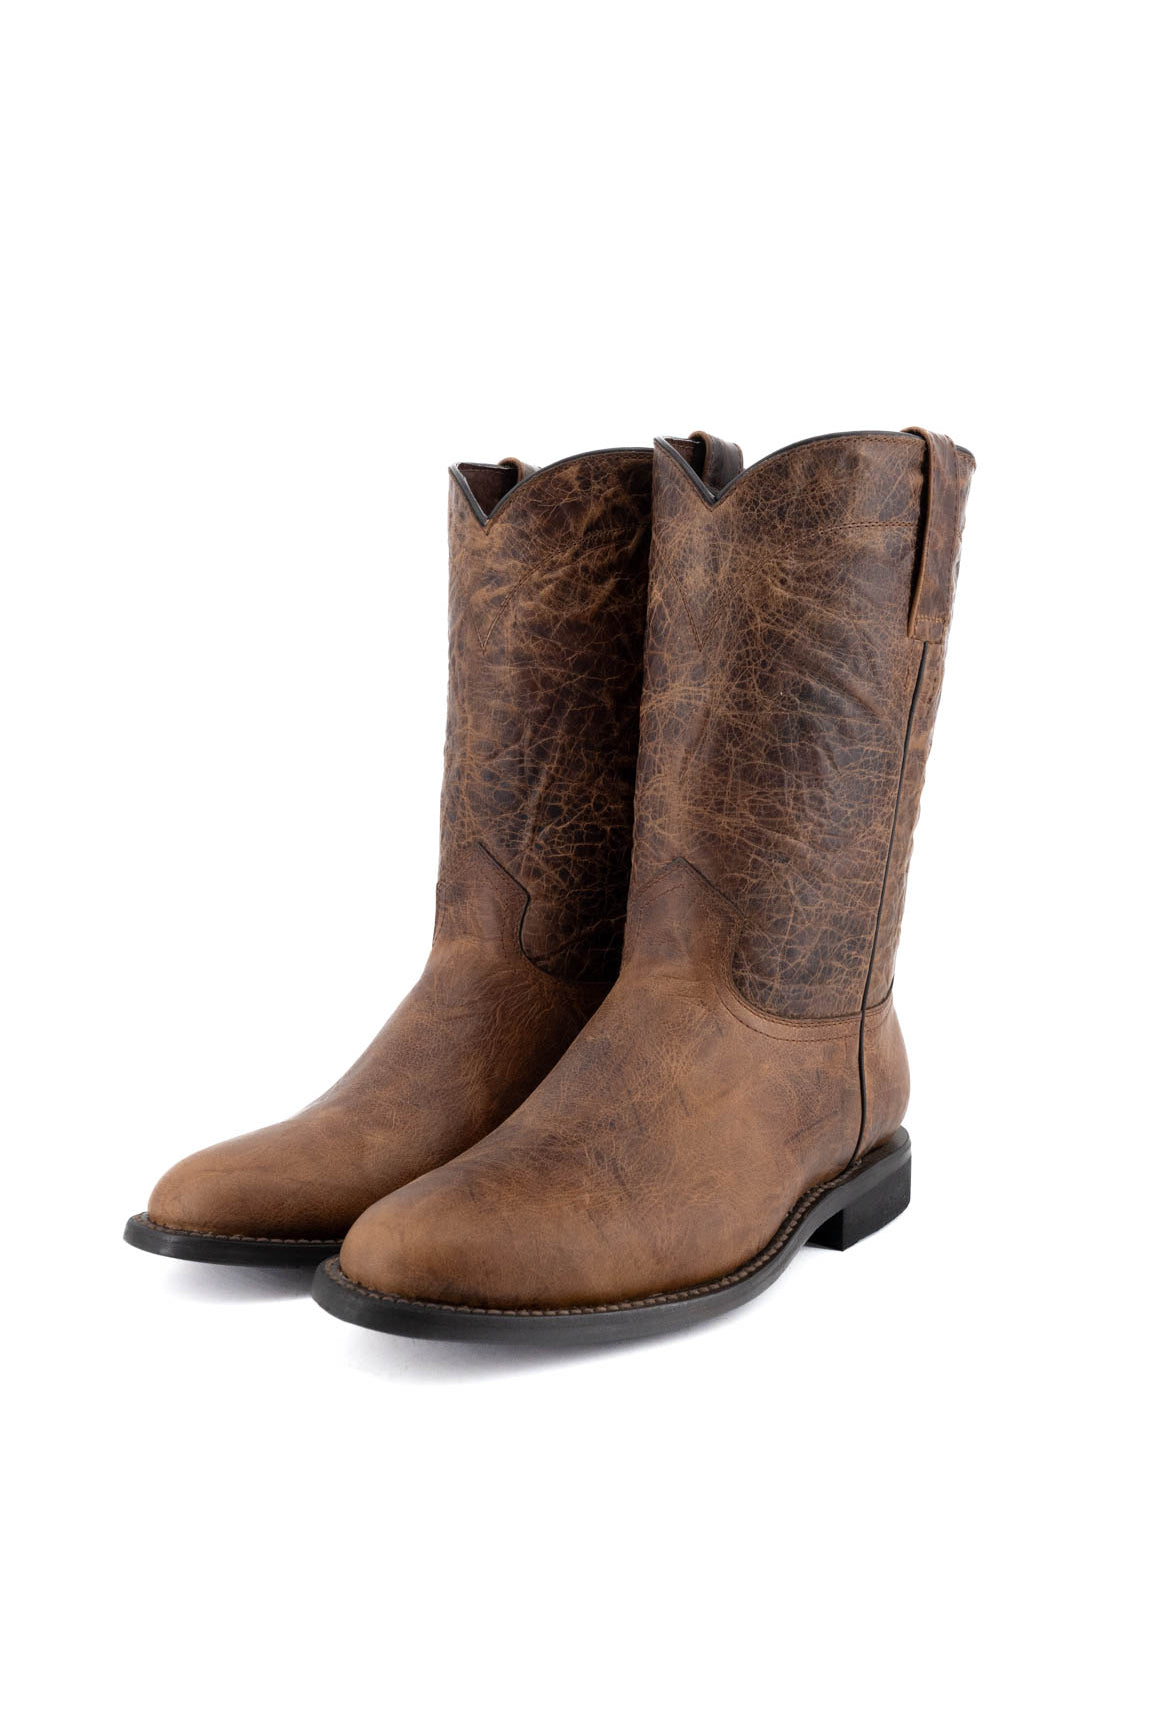 Rooper Round Toe Cowboy Boot